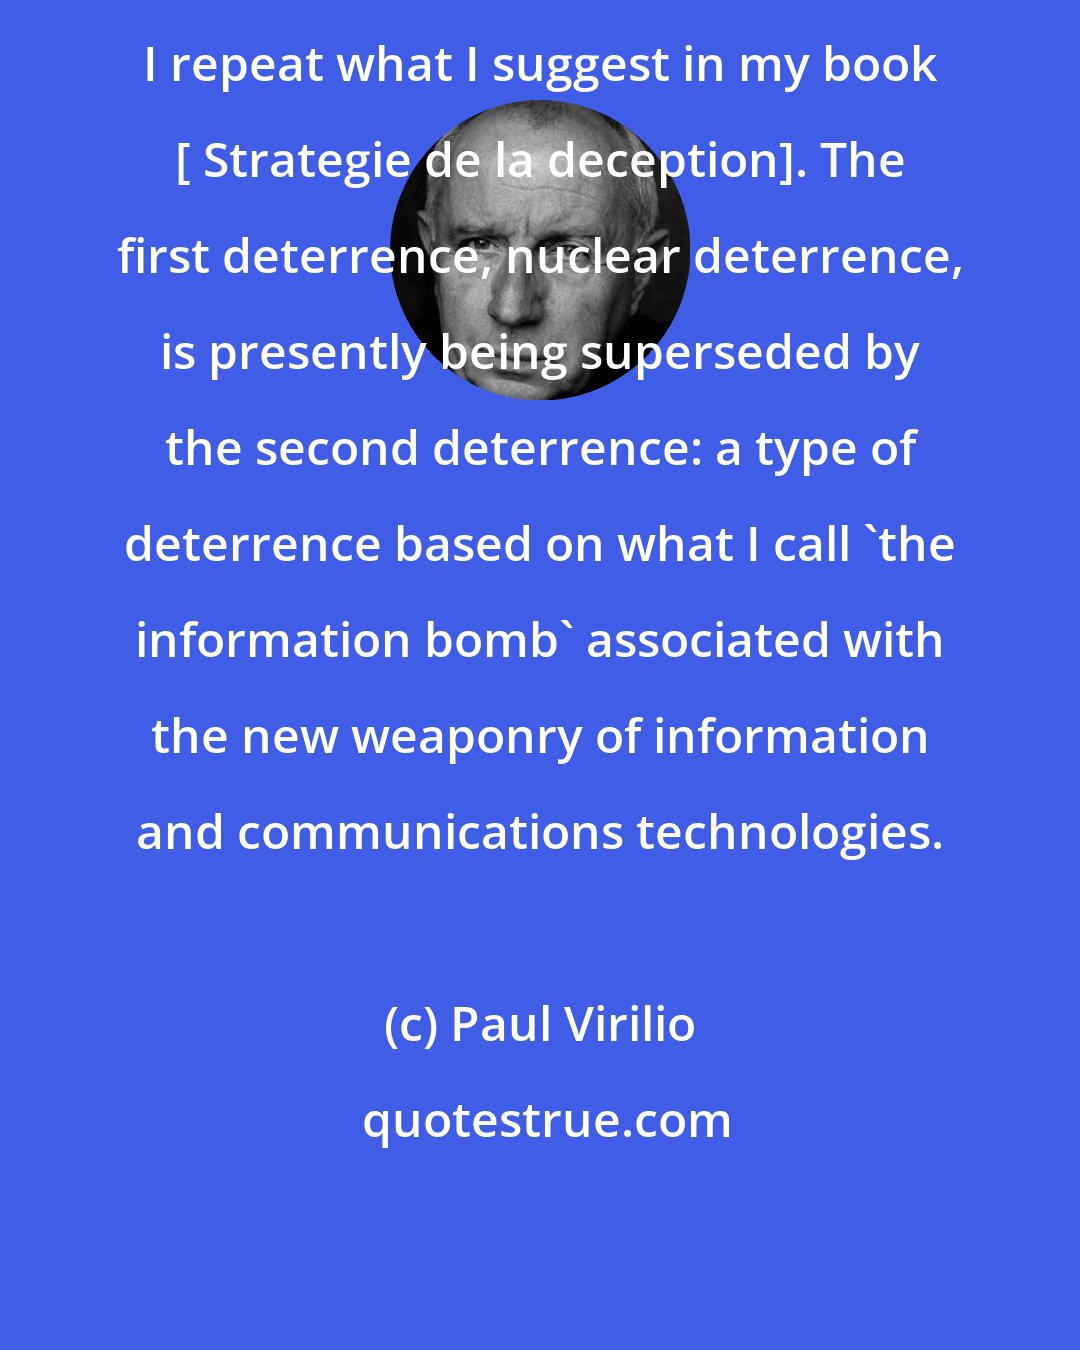 Paul Virilio: I repeat what I suggest in my book [ Strategie de la deception]. The first deterrence, nuclear deterrence, is presently being superseded by the second deterrence: a type of deterrence based on what I call 'the information bomb' associated with the new weaponry of information and communications technologies.